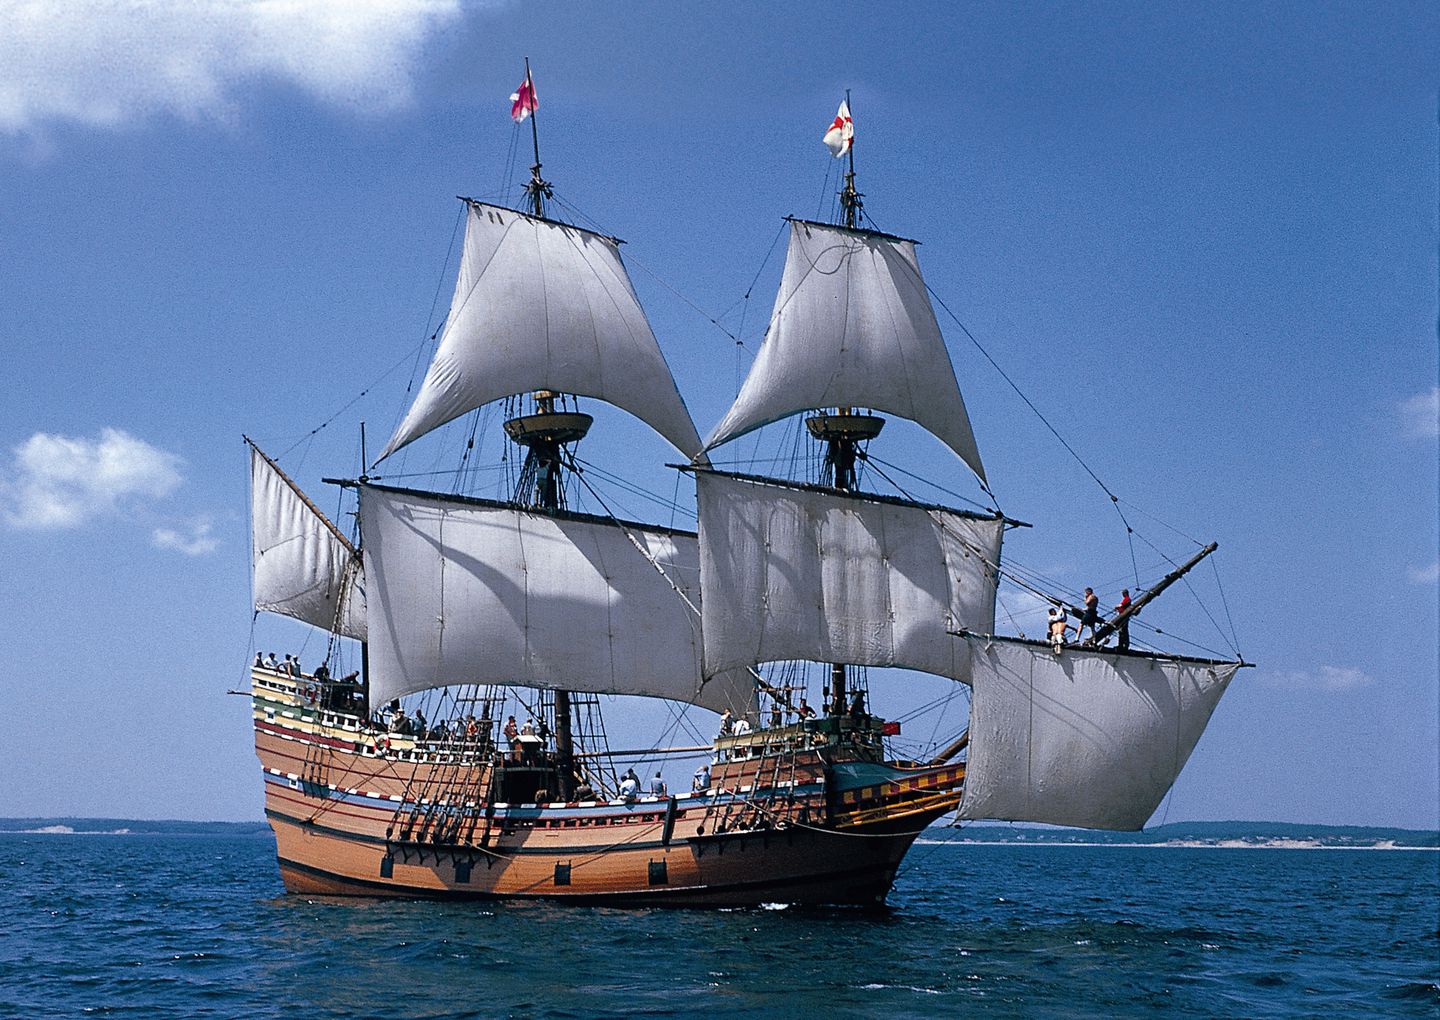 The History of the Mayflower, a talk by Linda MacIver - Concord, MA